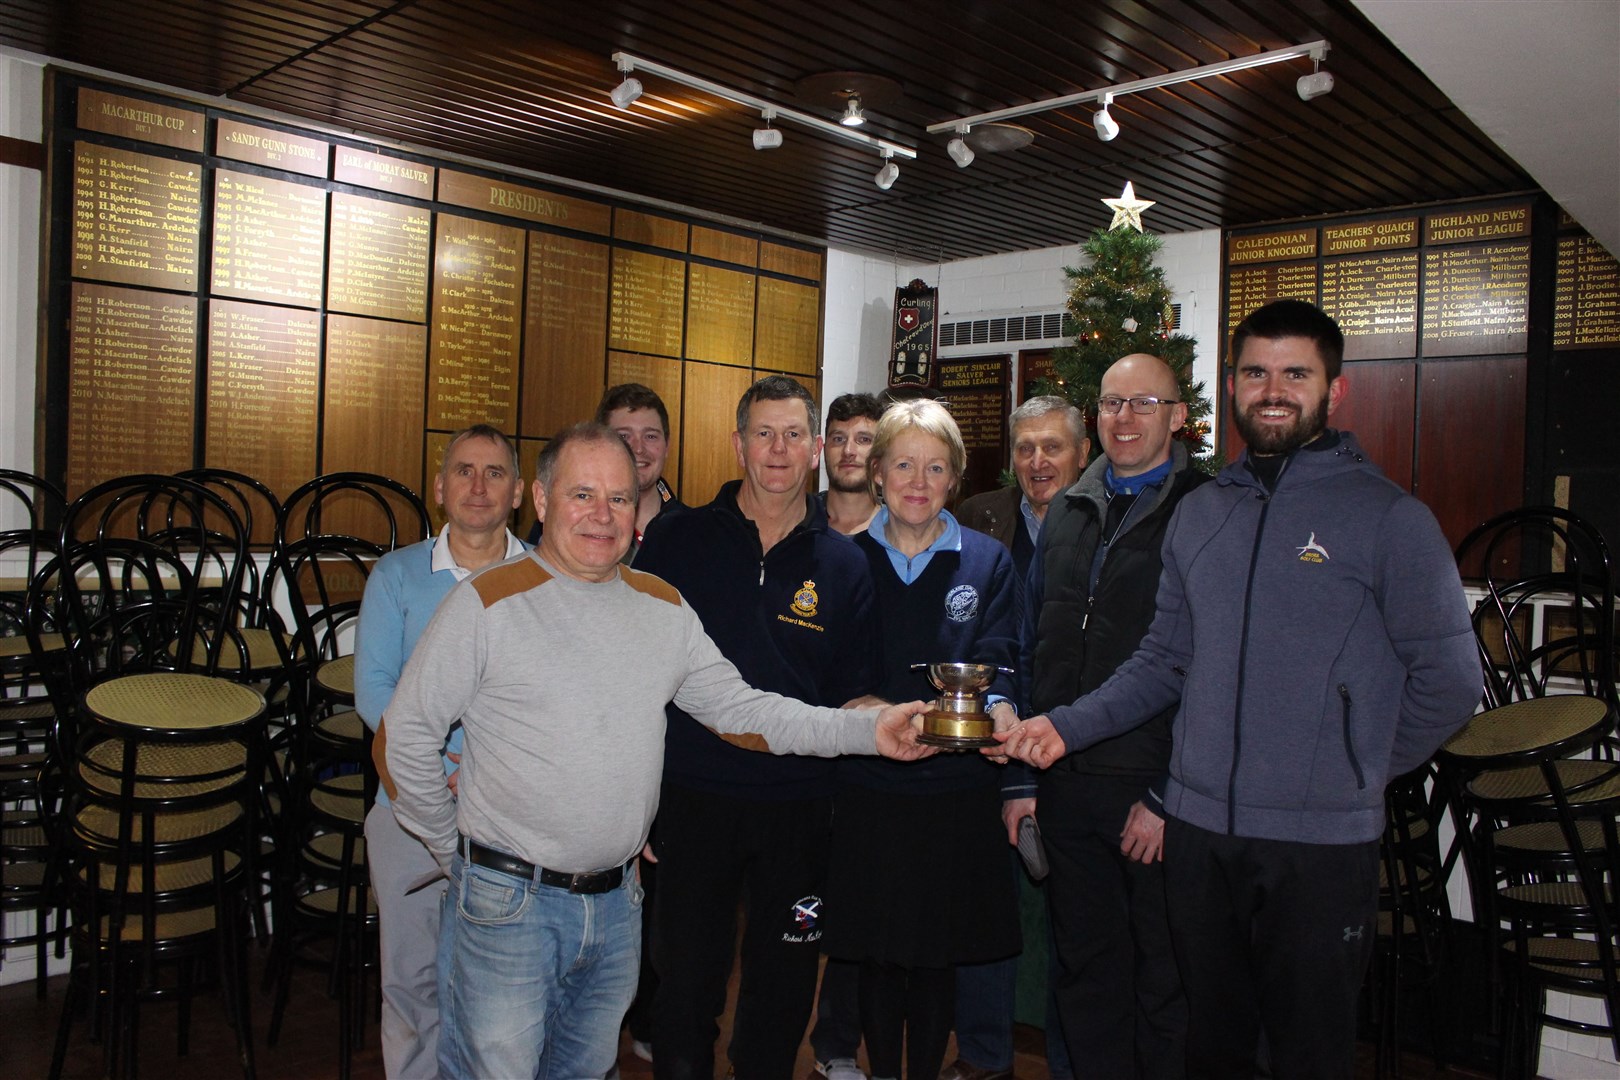 Finlay MacKenzie (President of Ross-shire Province) hands over the trophy to the Locheye/Invergordon curlers left to right Richard MacKenzie Helen Lyon, Roy Watson and Calum Stewart.